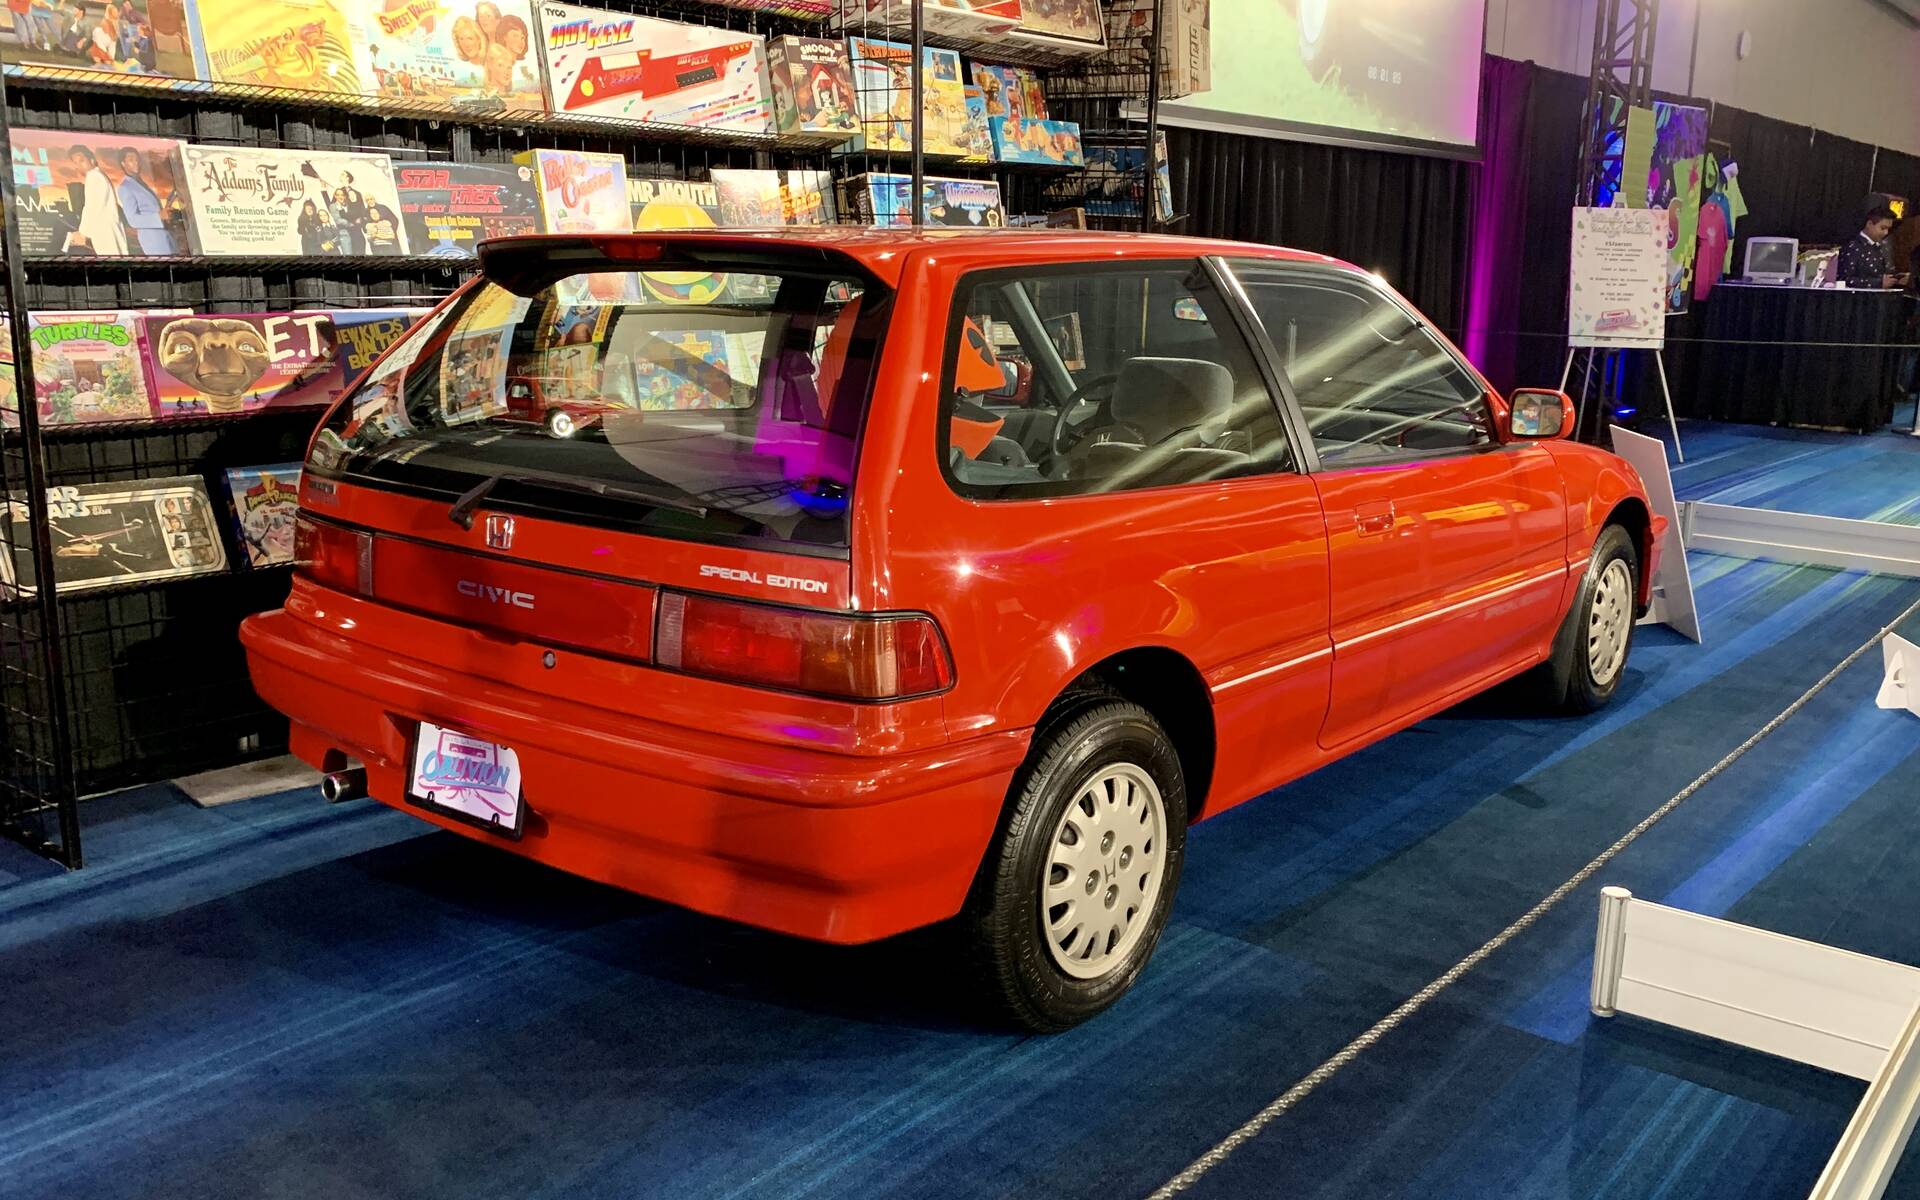 <p><strong>Honda Civic Special Edition 1991</strong></p>